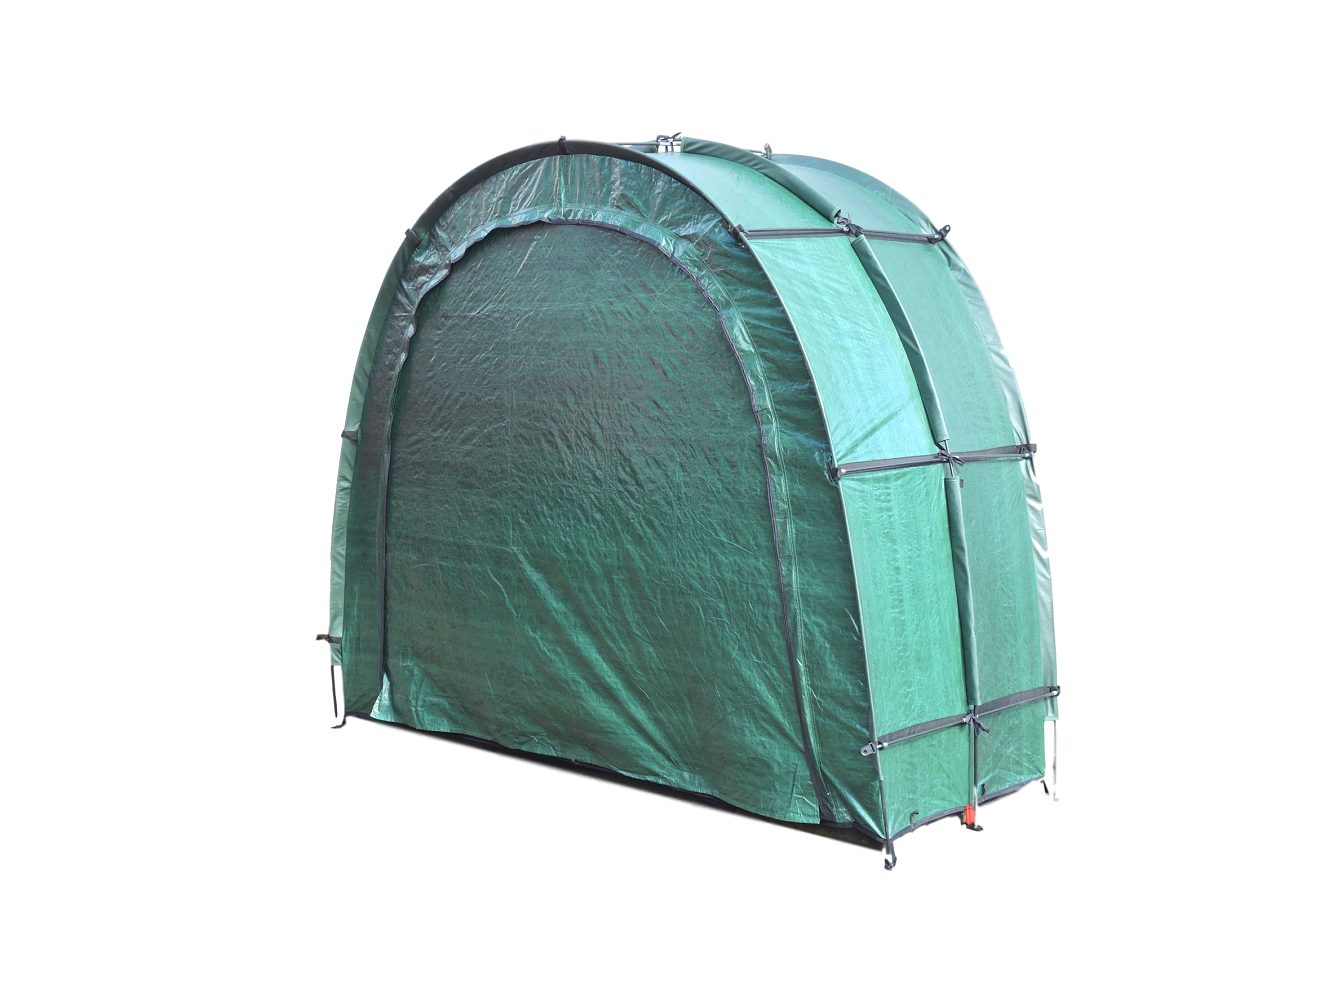 Tidy Tent Large Waterproof Durable Storage Bike Camping Cave Outdoor shed K9U9 